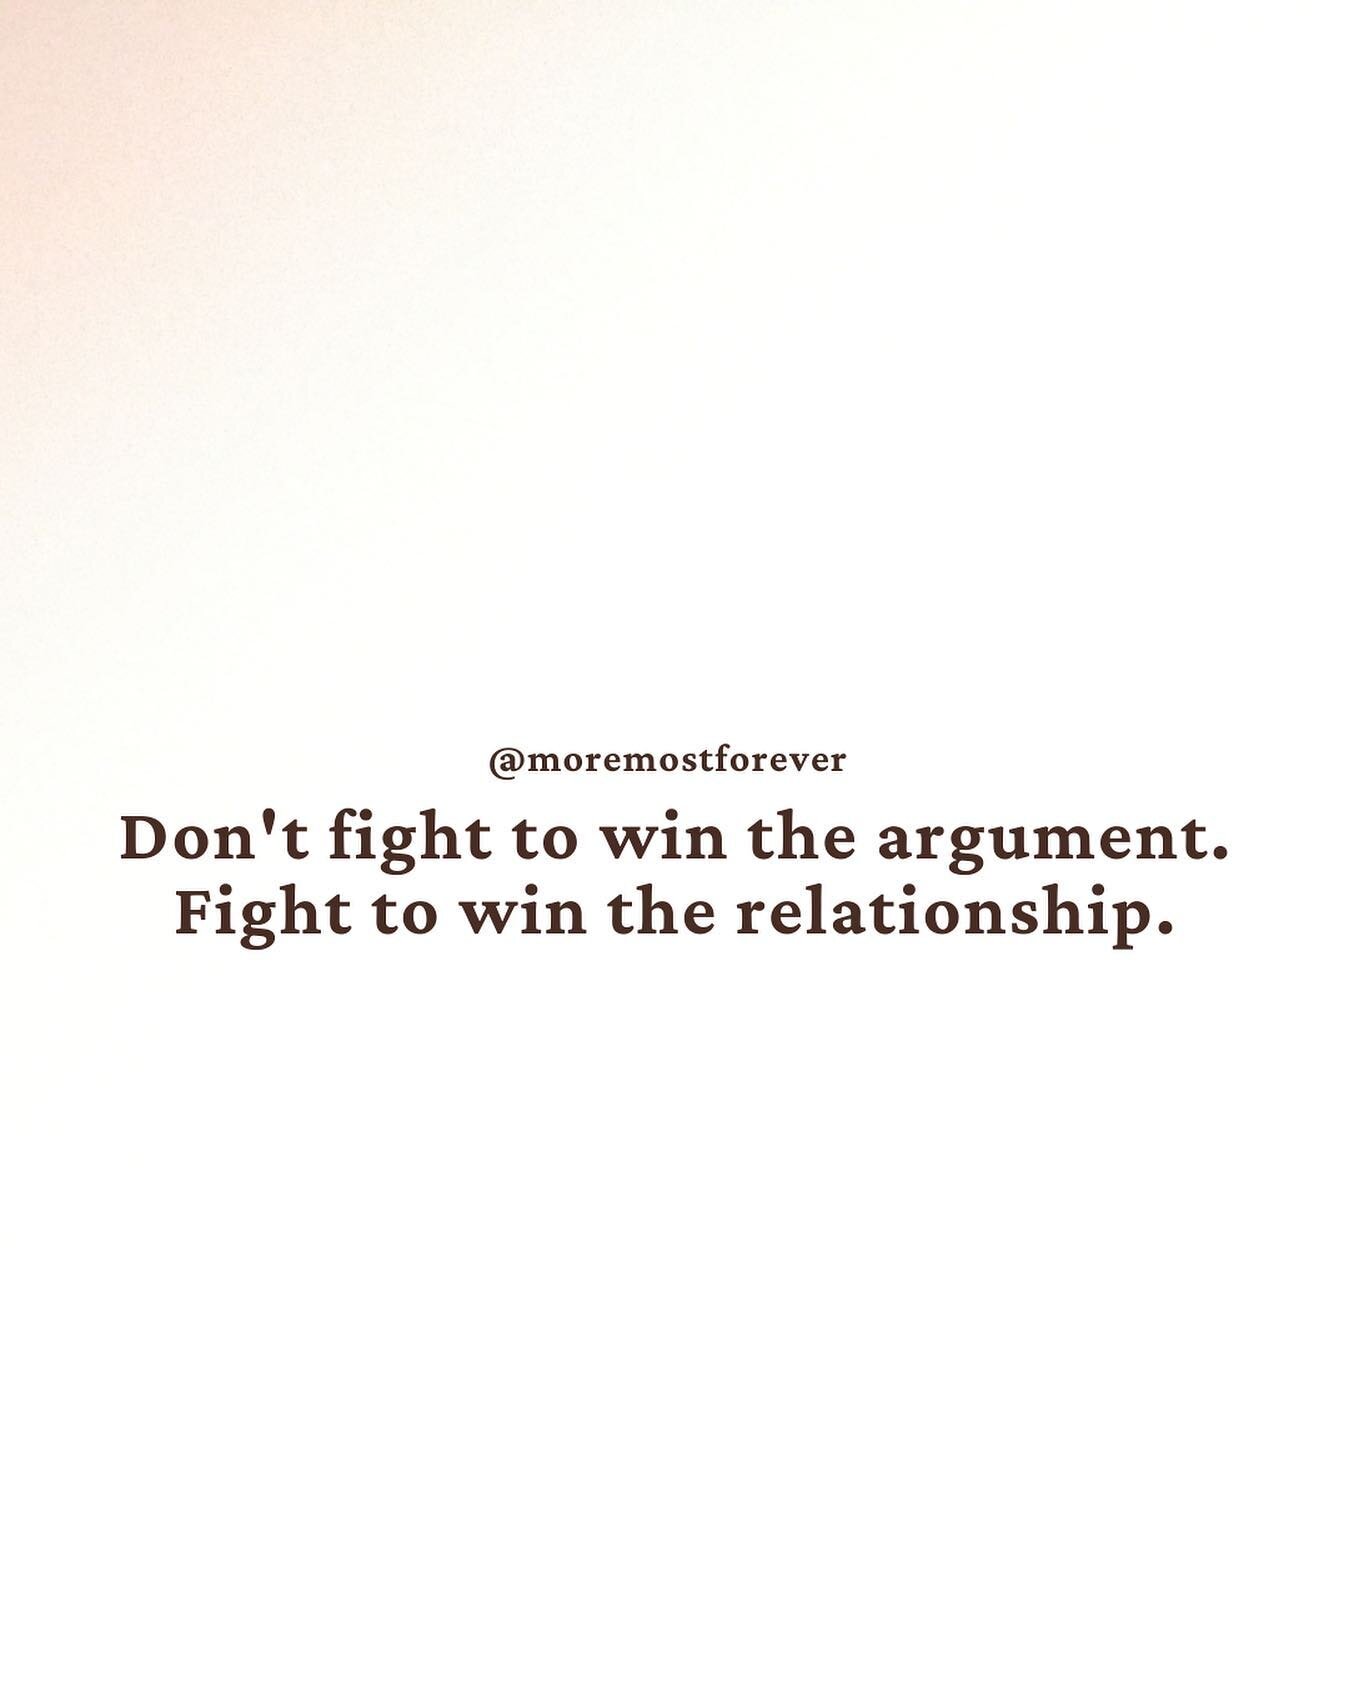 Fighting in marriage should be expected. Tension is a good thing and you&rsquo;re not supposed to think the same. If fighting is inevitable then you have to fight well. You&rsquo;re not fighting one another but fighting to understand each other more.